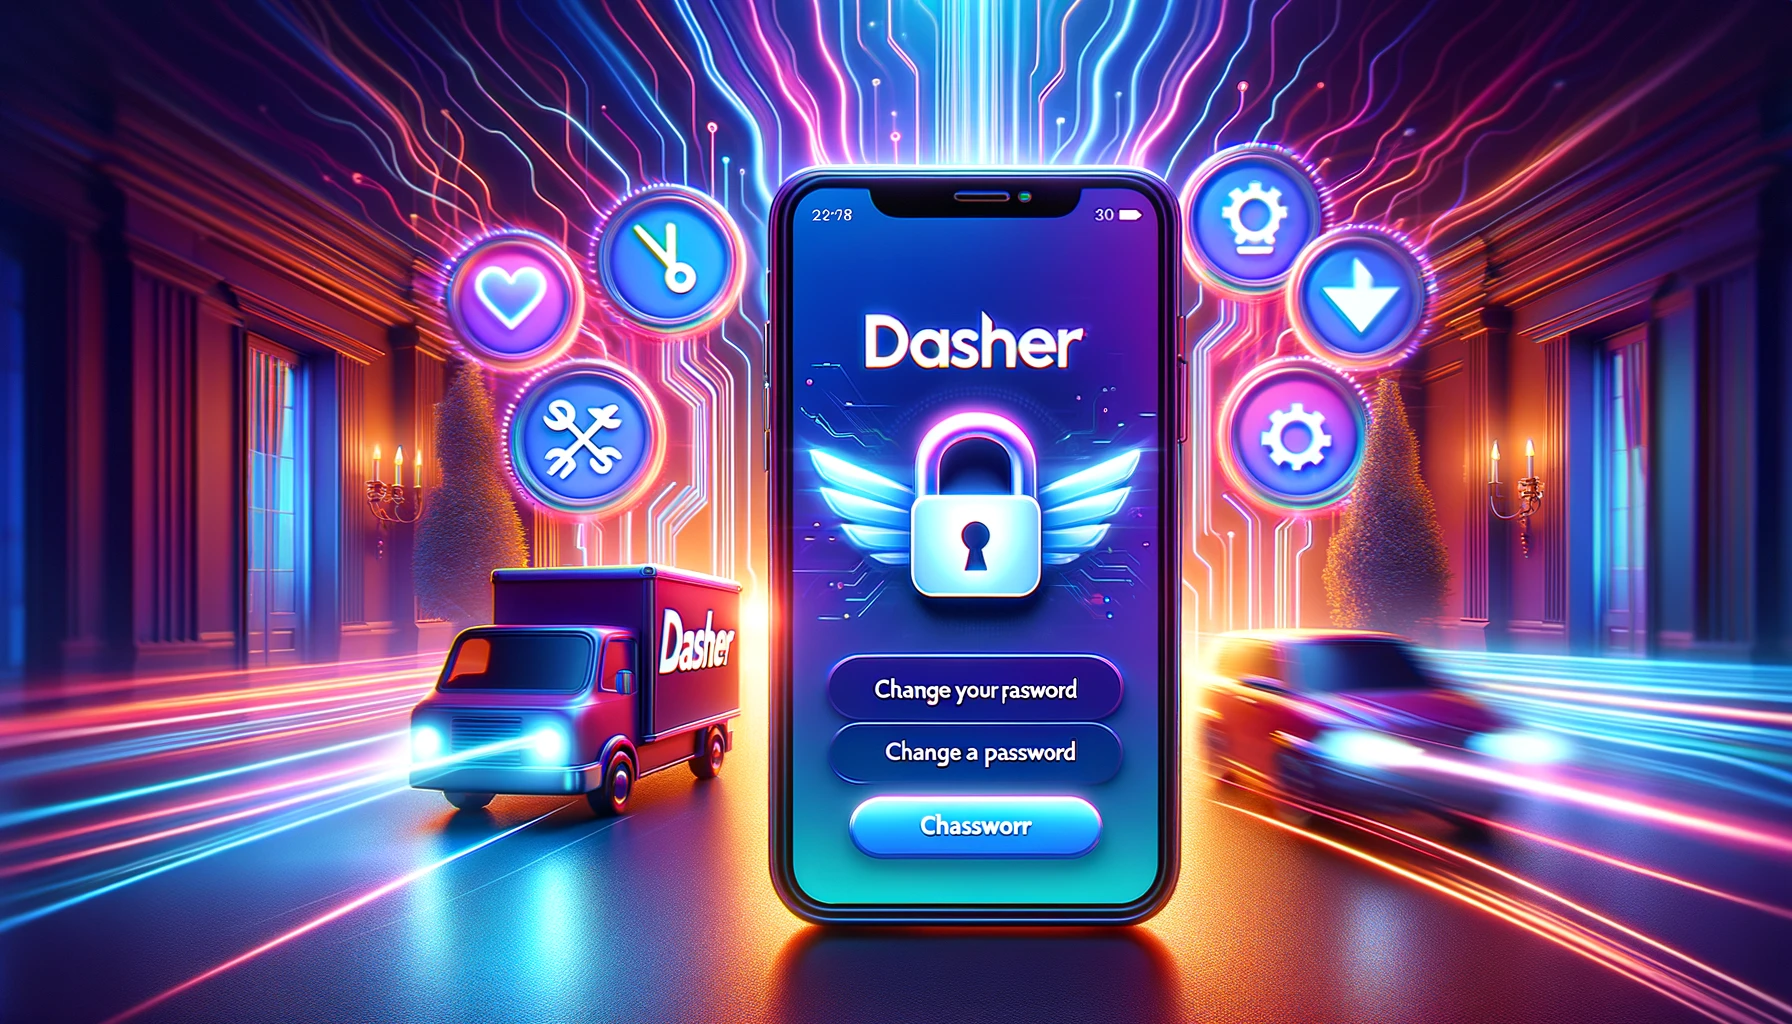 How to Change Password on Dasher App